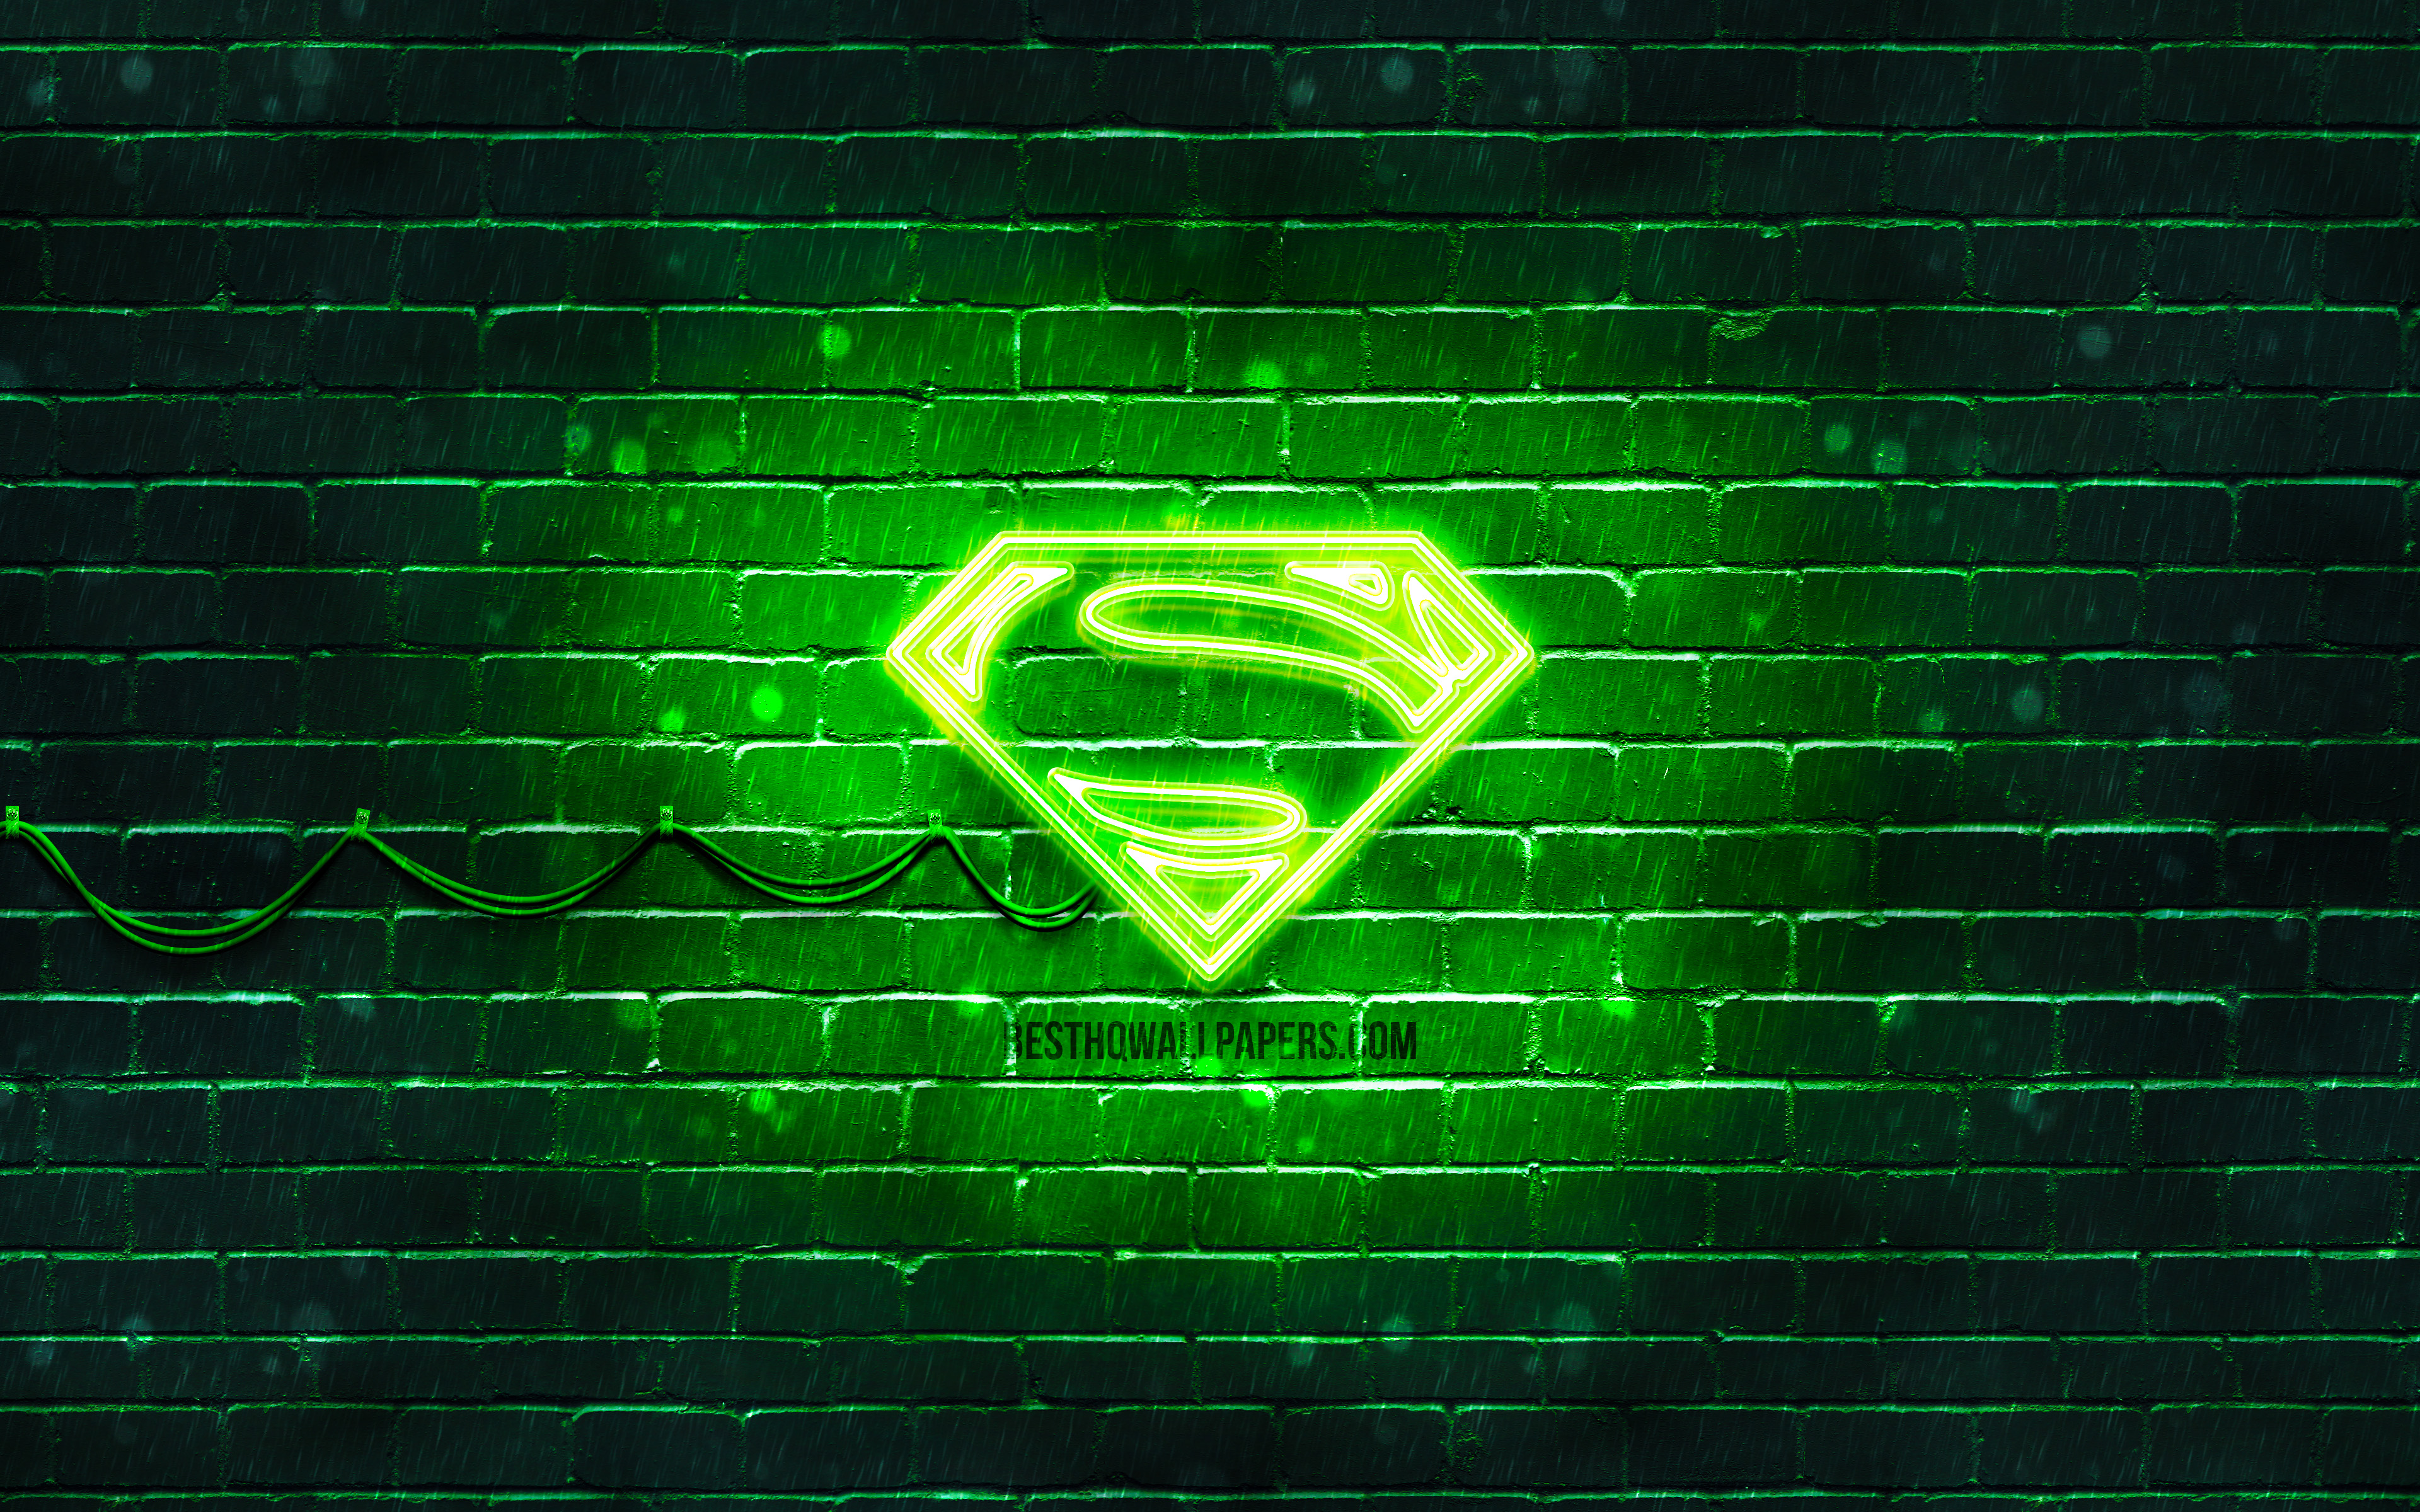 Download wallpaper Superman green logo, 4k, green brickwall, Superman logo, superheroes, Superman neon logo, Superman for desktop with resolution 3840x2400. High Quality HD picture wallpaper